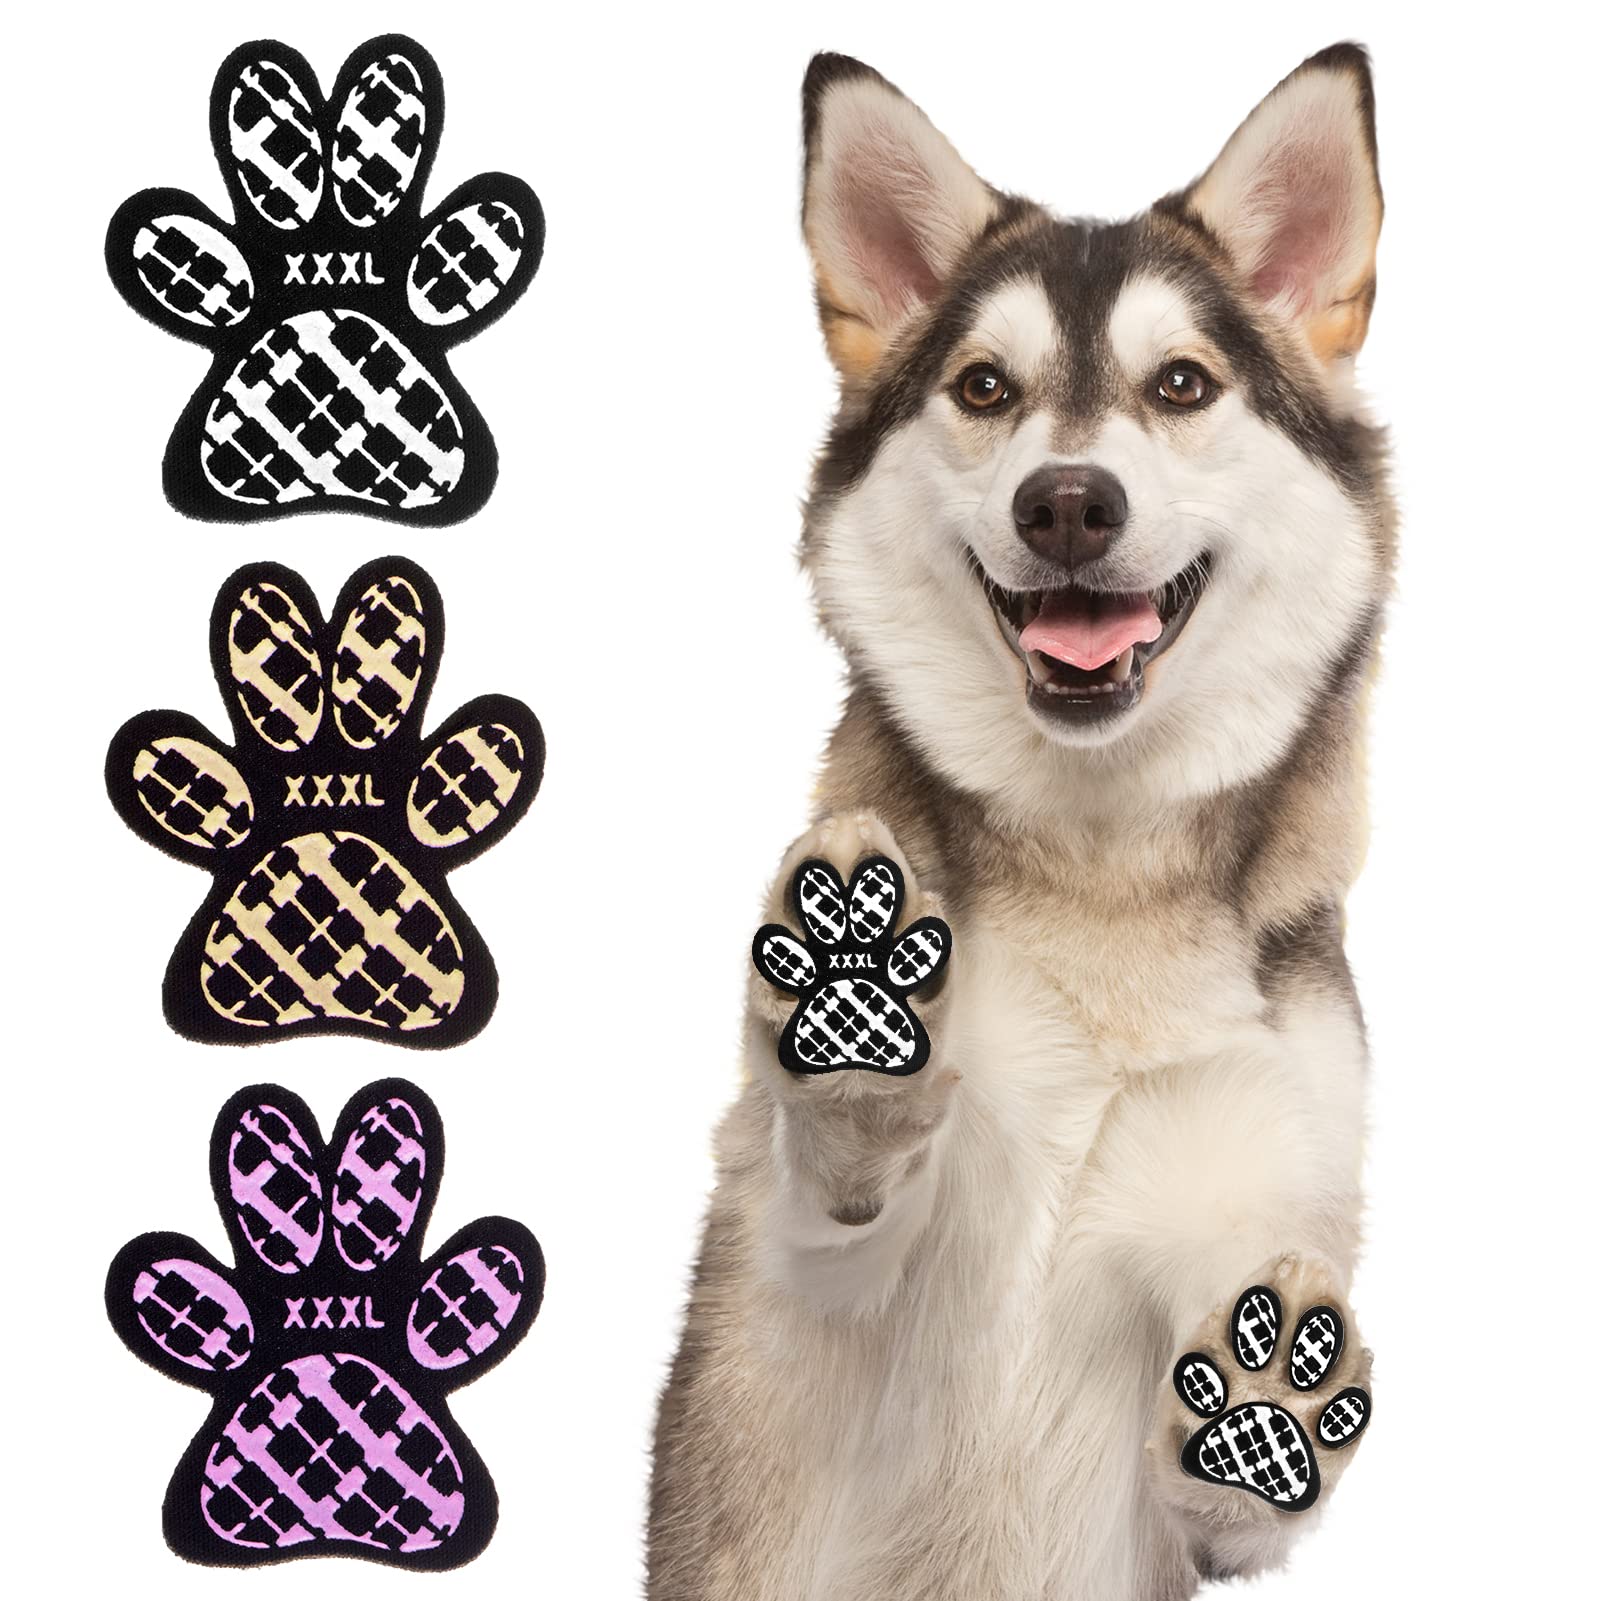 BEAUTYZOO Dog Paw Protectors Grip Pads Anti-Slip Traction for Small Medium  Large Dogs on Hardwood Floors Hot Pavement, Dog Grip for Senior Dogs Injury  Protection for Paws 48 Pads, XXXL 12 Sets